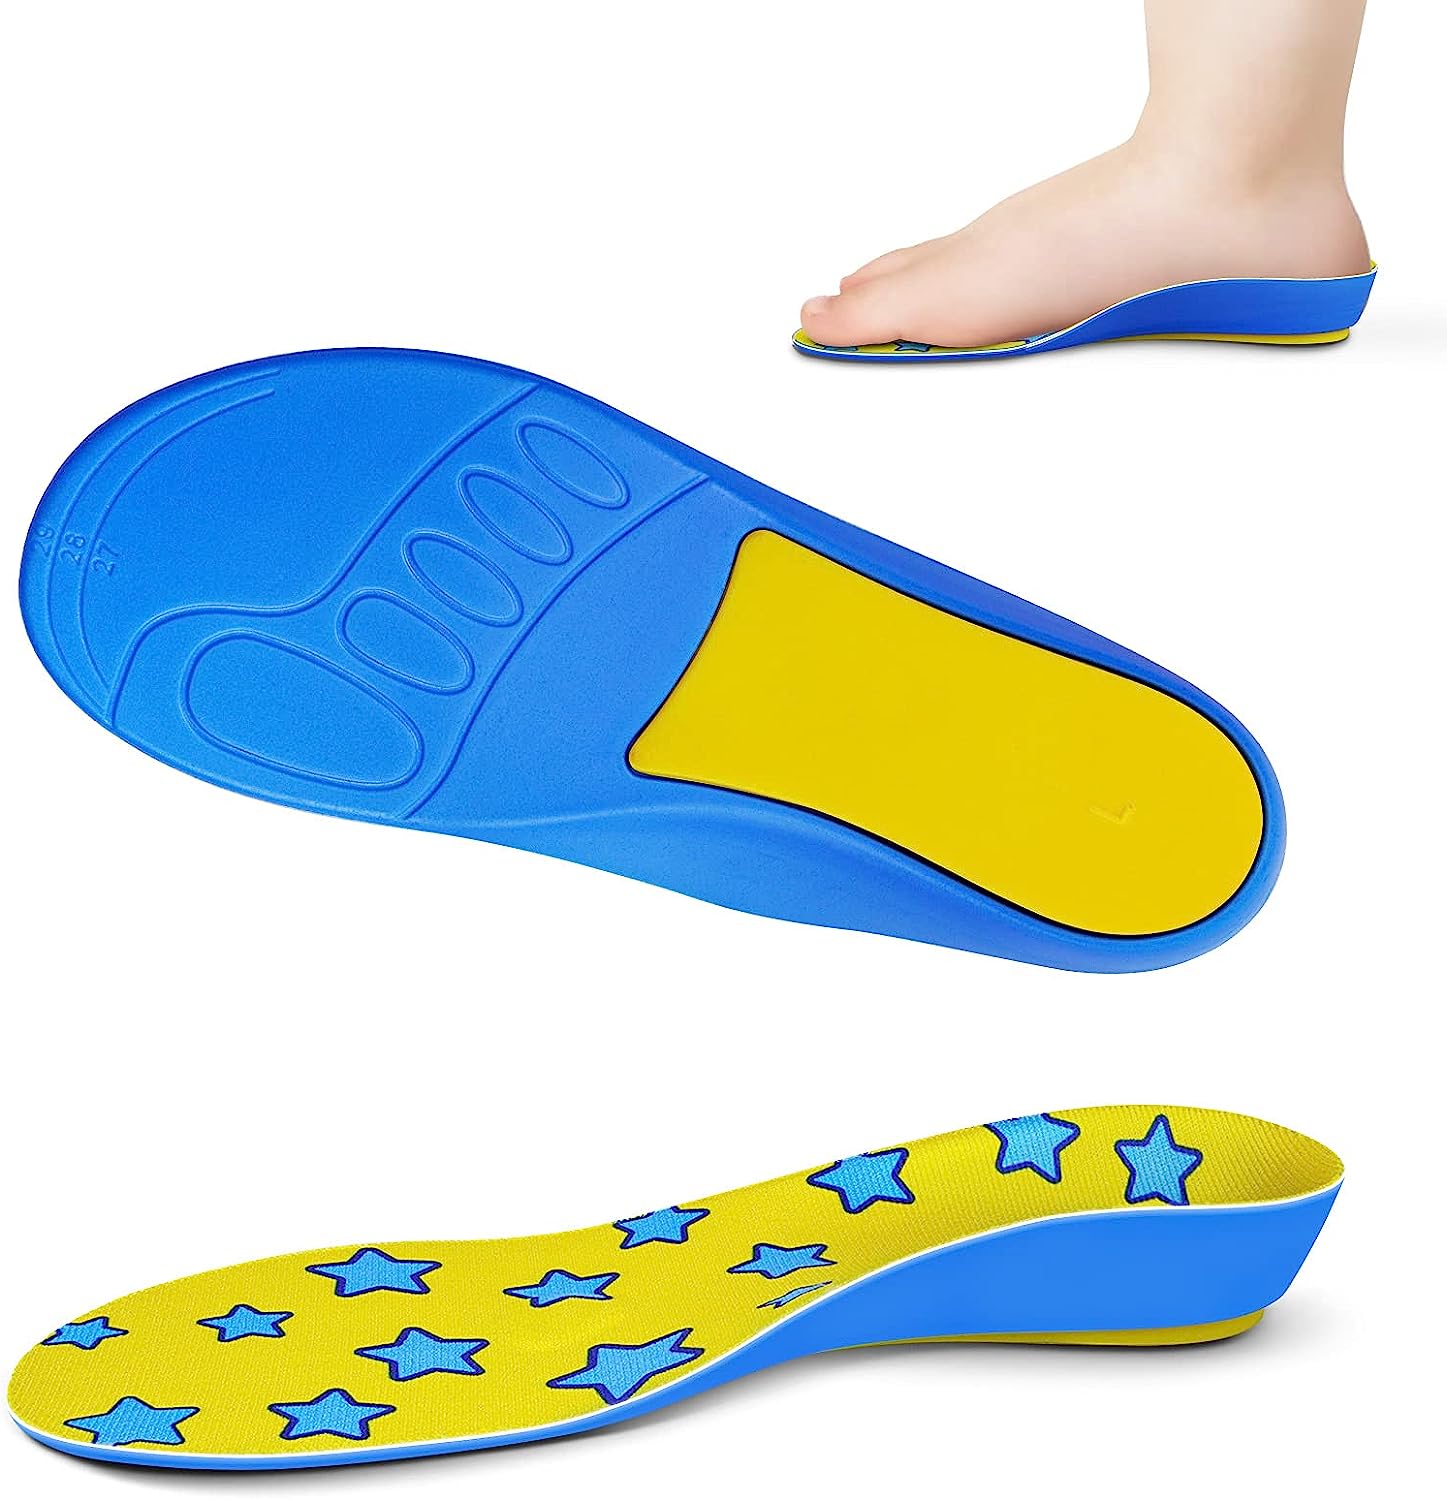 Kids Arch Support Shoe Inserts - Kids Orthotic Inserts [...]